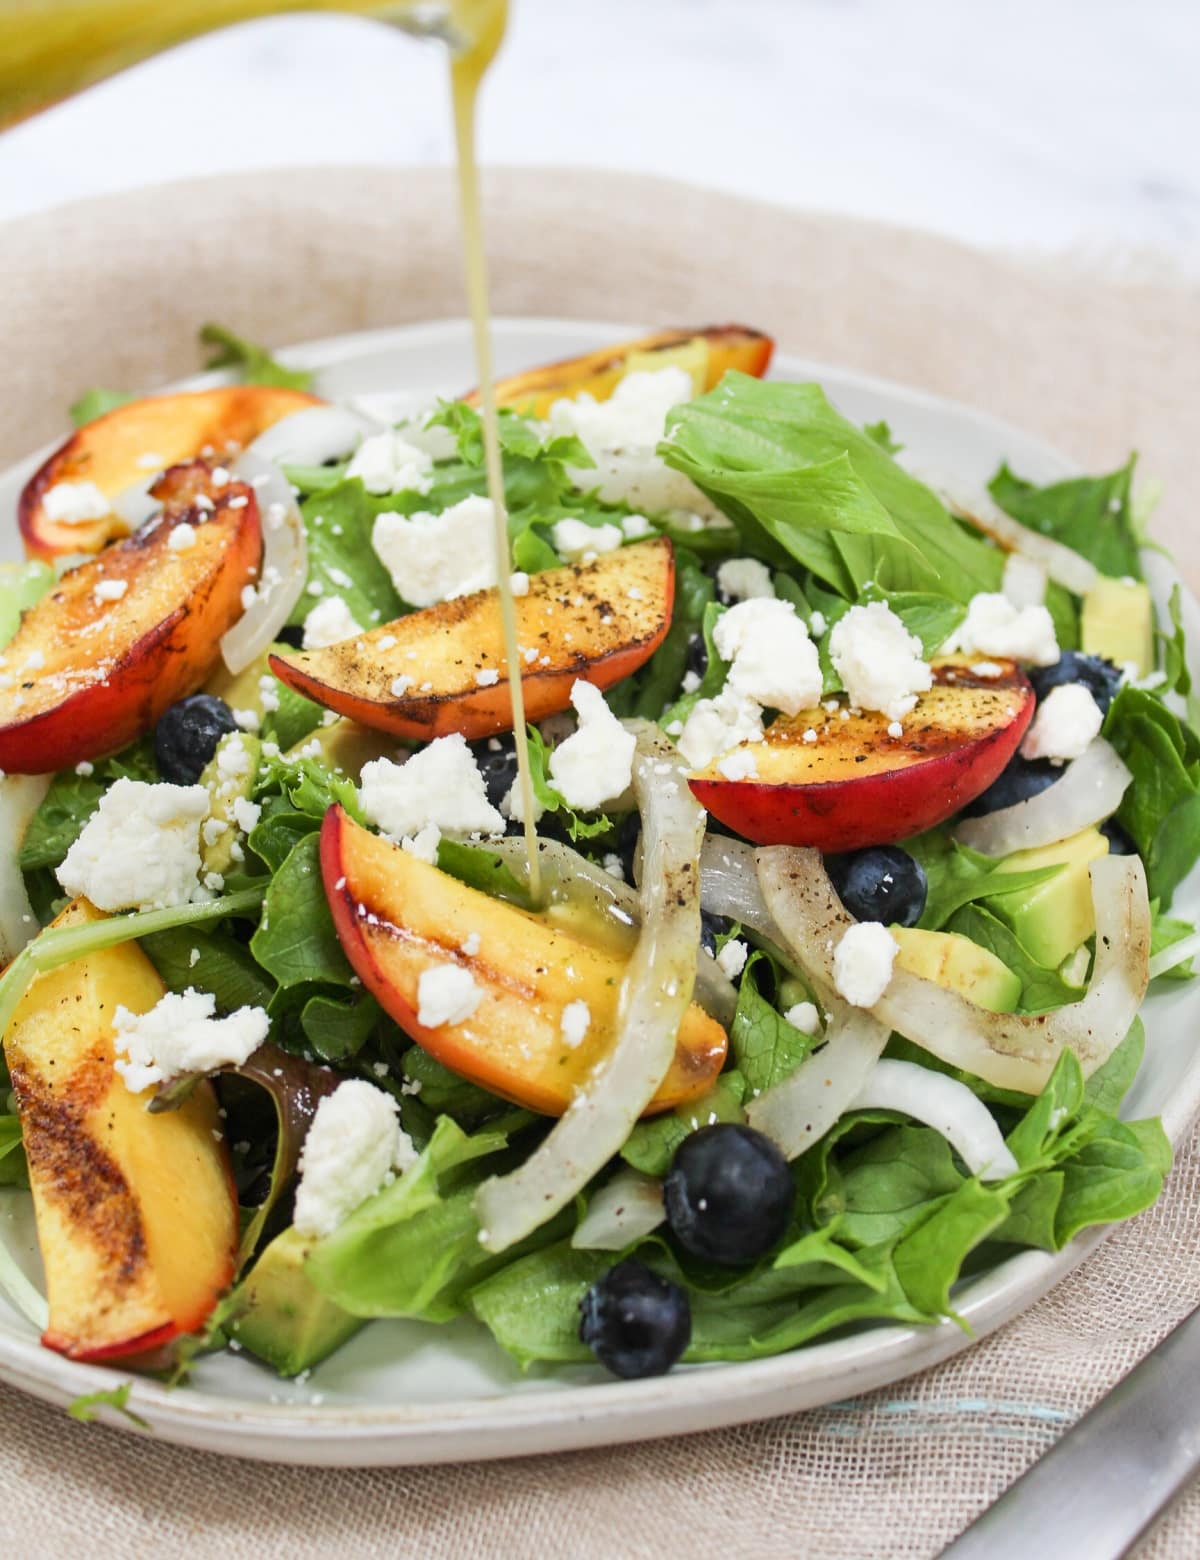 Lettuce topped with sliced onions, grilled peaches, blueberries, and feta with dressing poured on top.